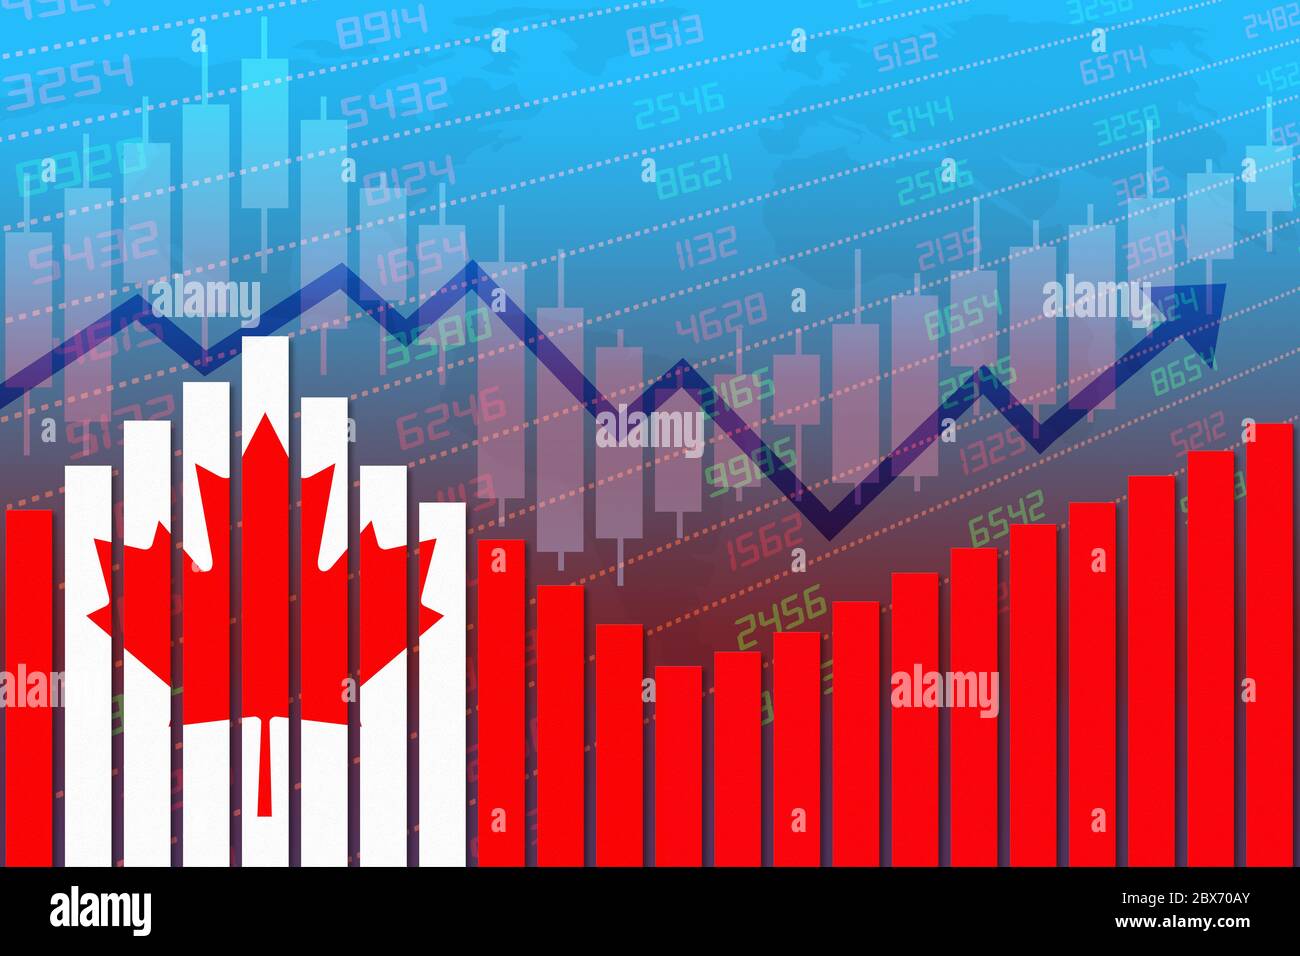 Canada flag on bar chart concept of economic recovery and business improving after crisis such as Covid-19 or other catastrophe as economy and busines Stock Photo